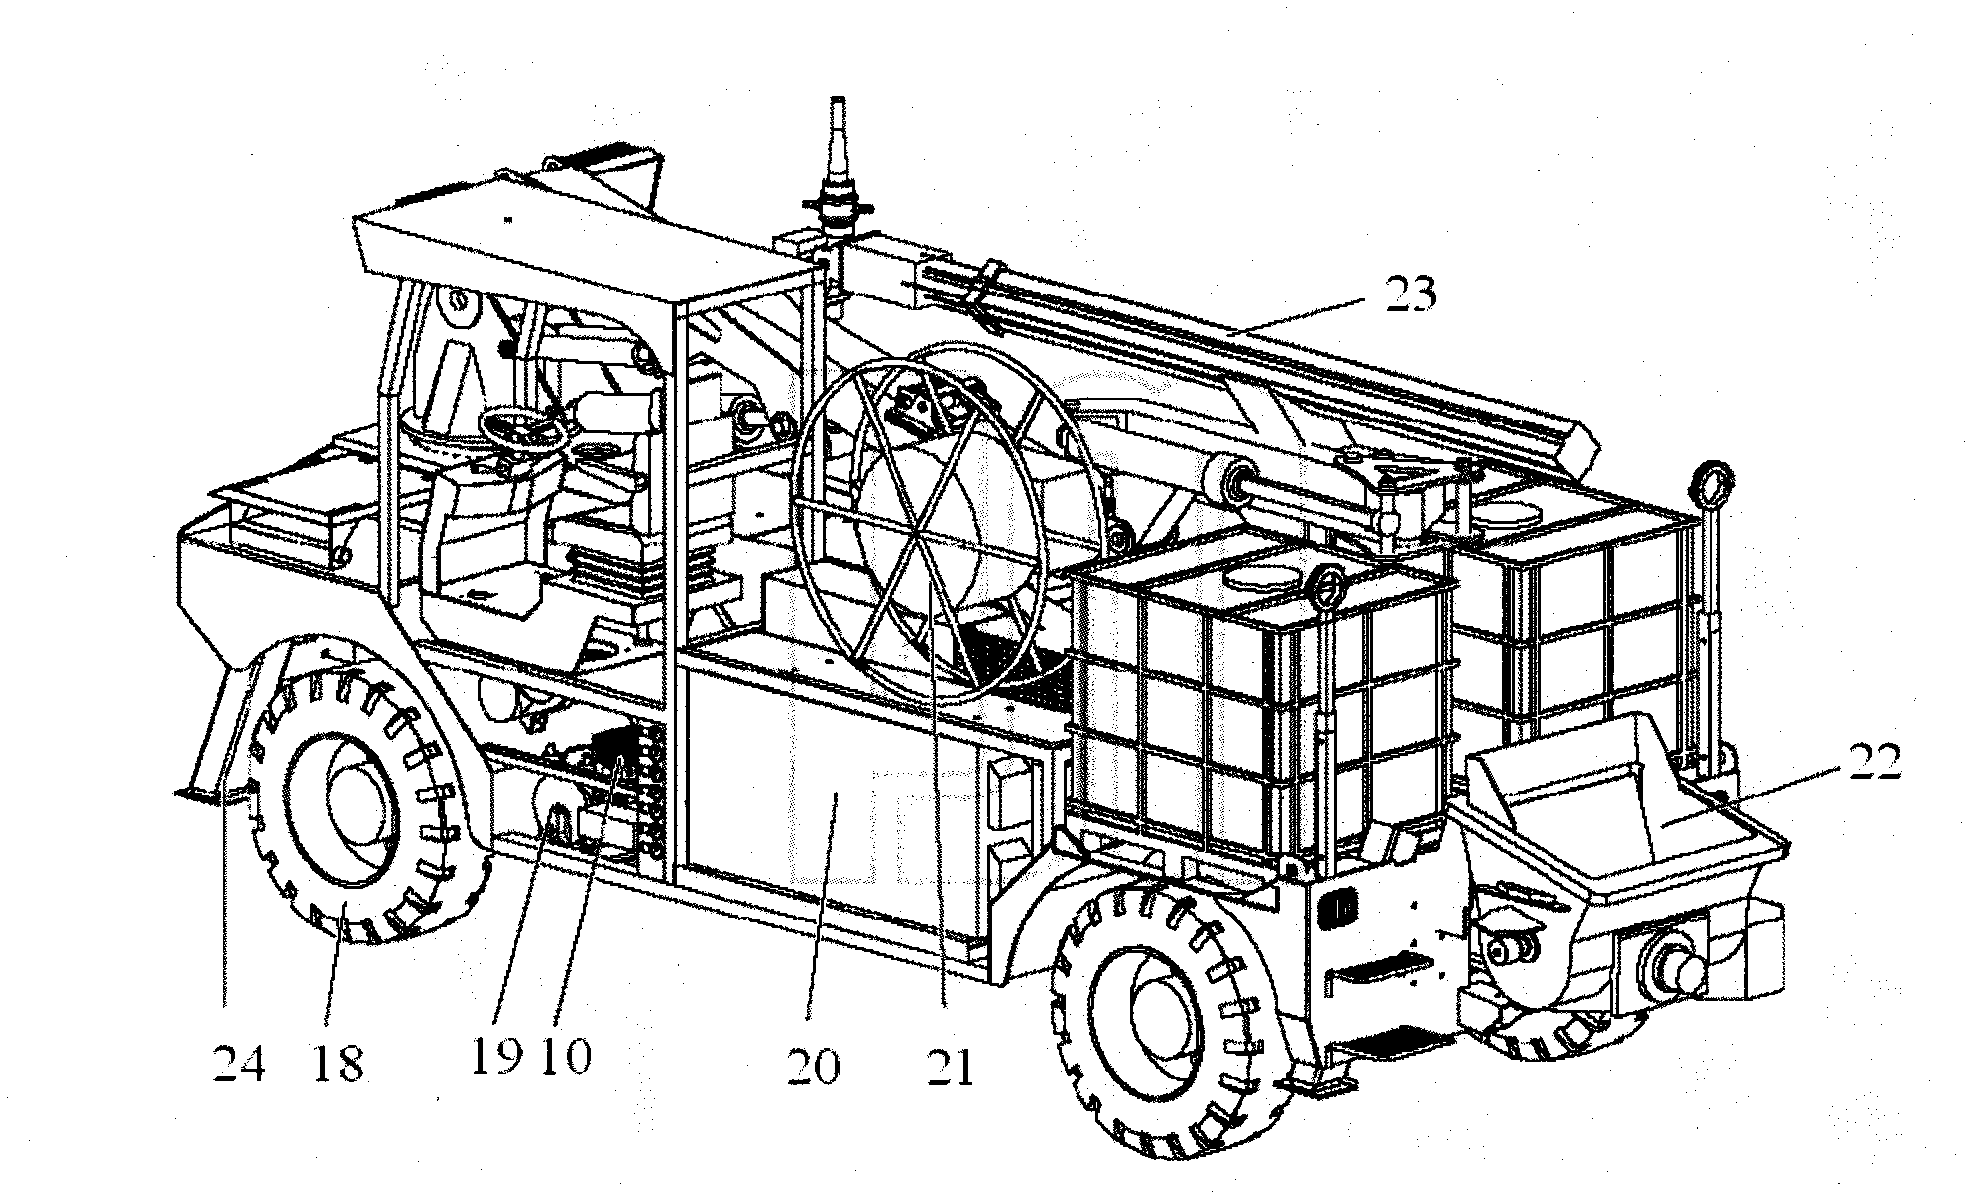 Control system and self-travelling type construction machinery with same